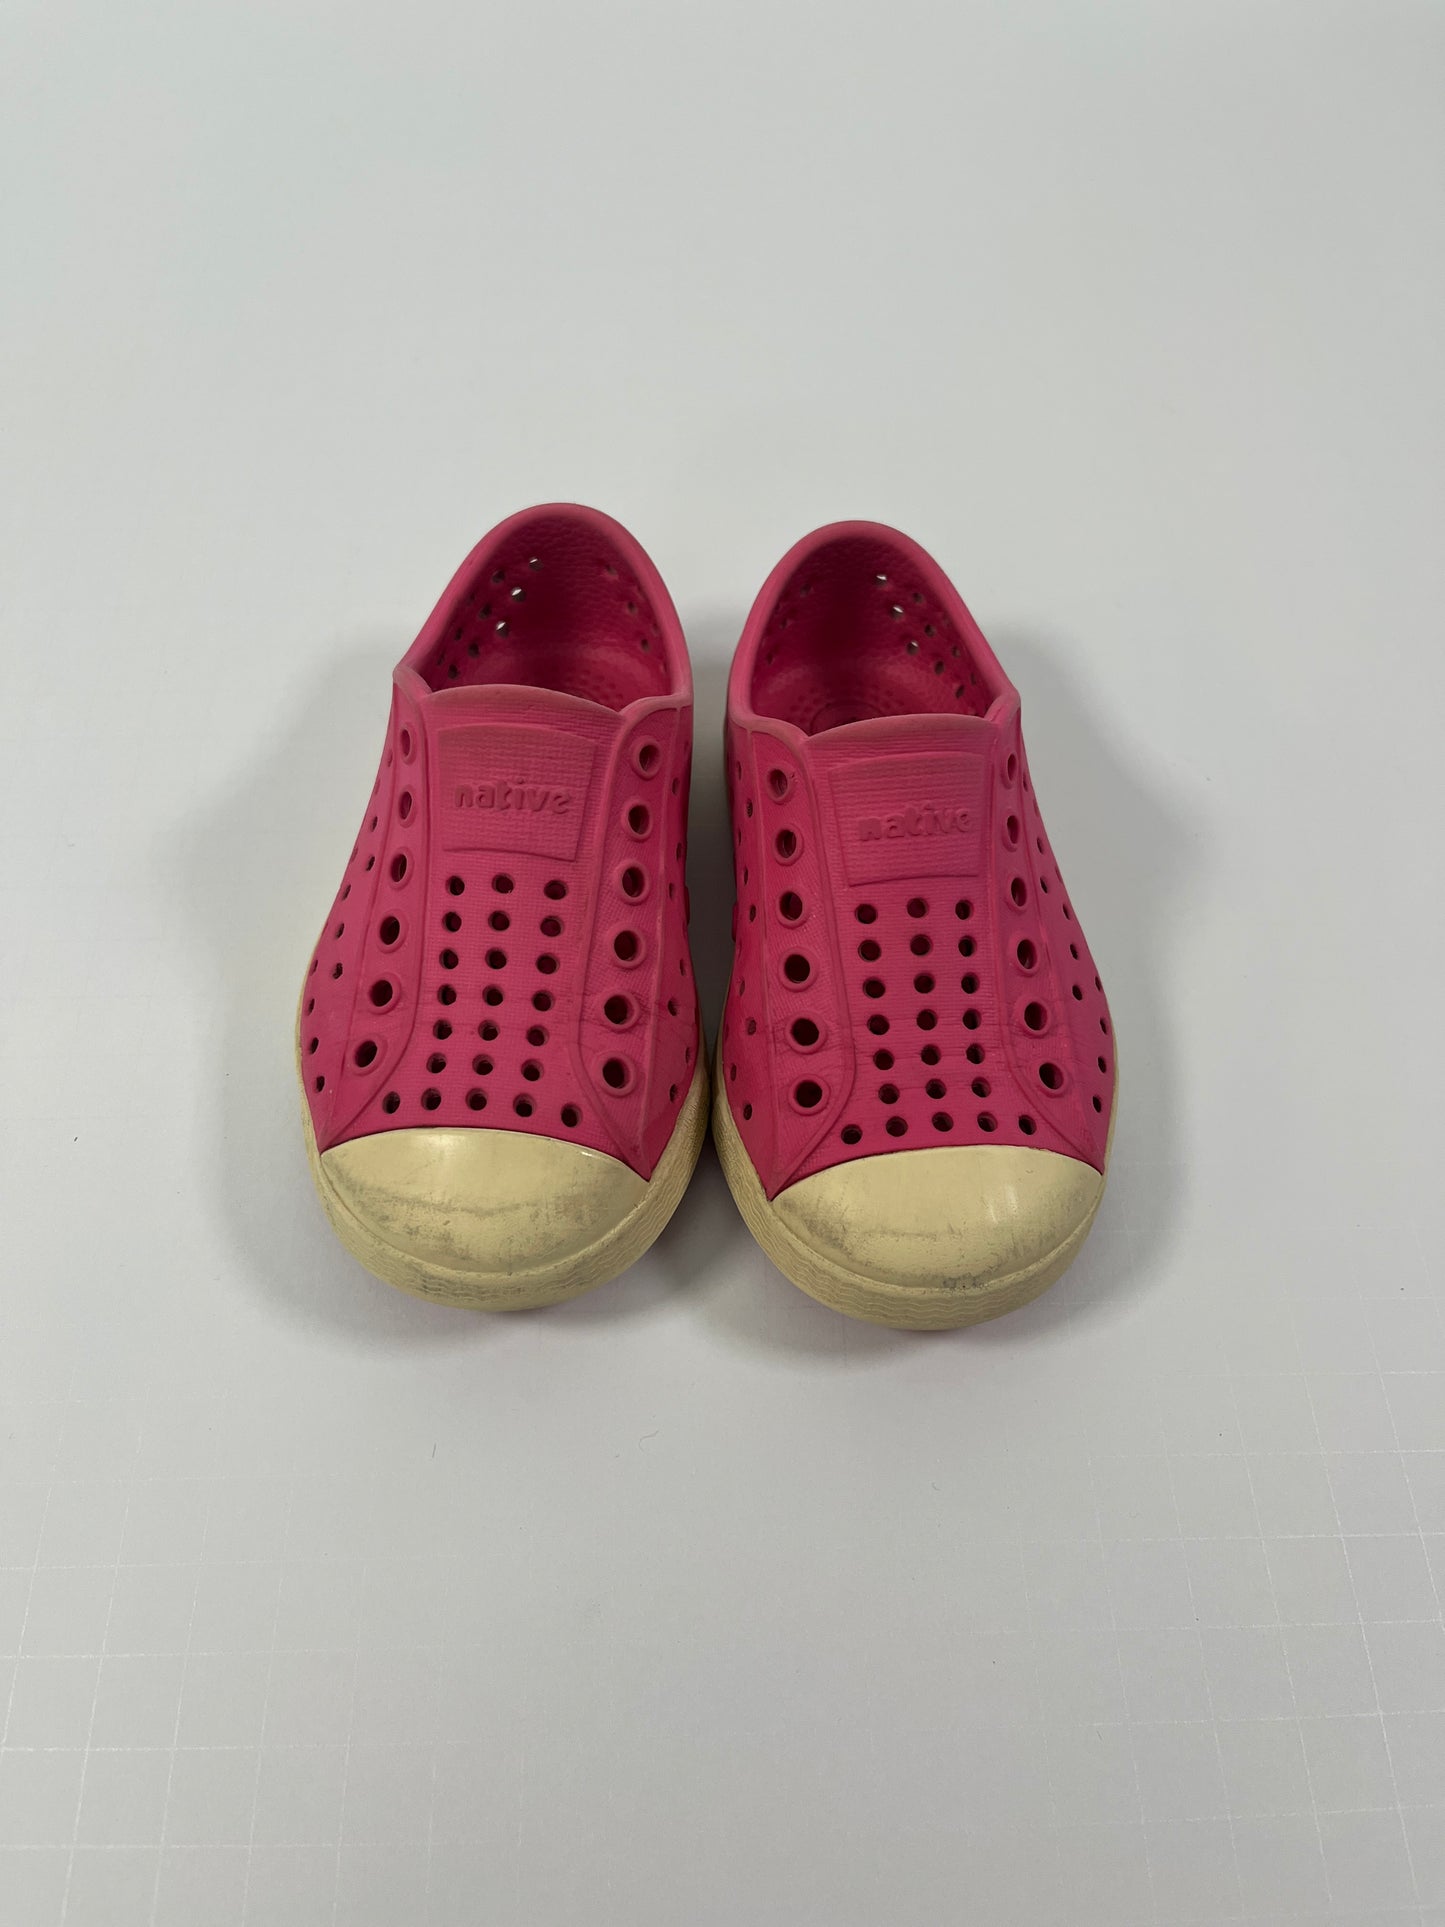 PPU 45242 girls Natives size C6 pink jefferson sneakers play condition